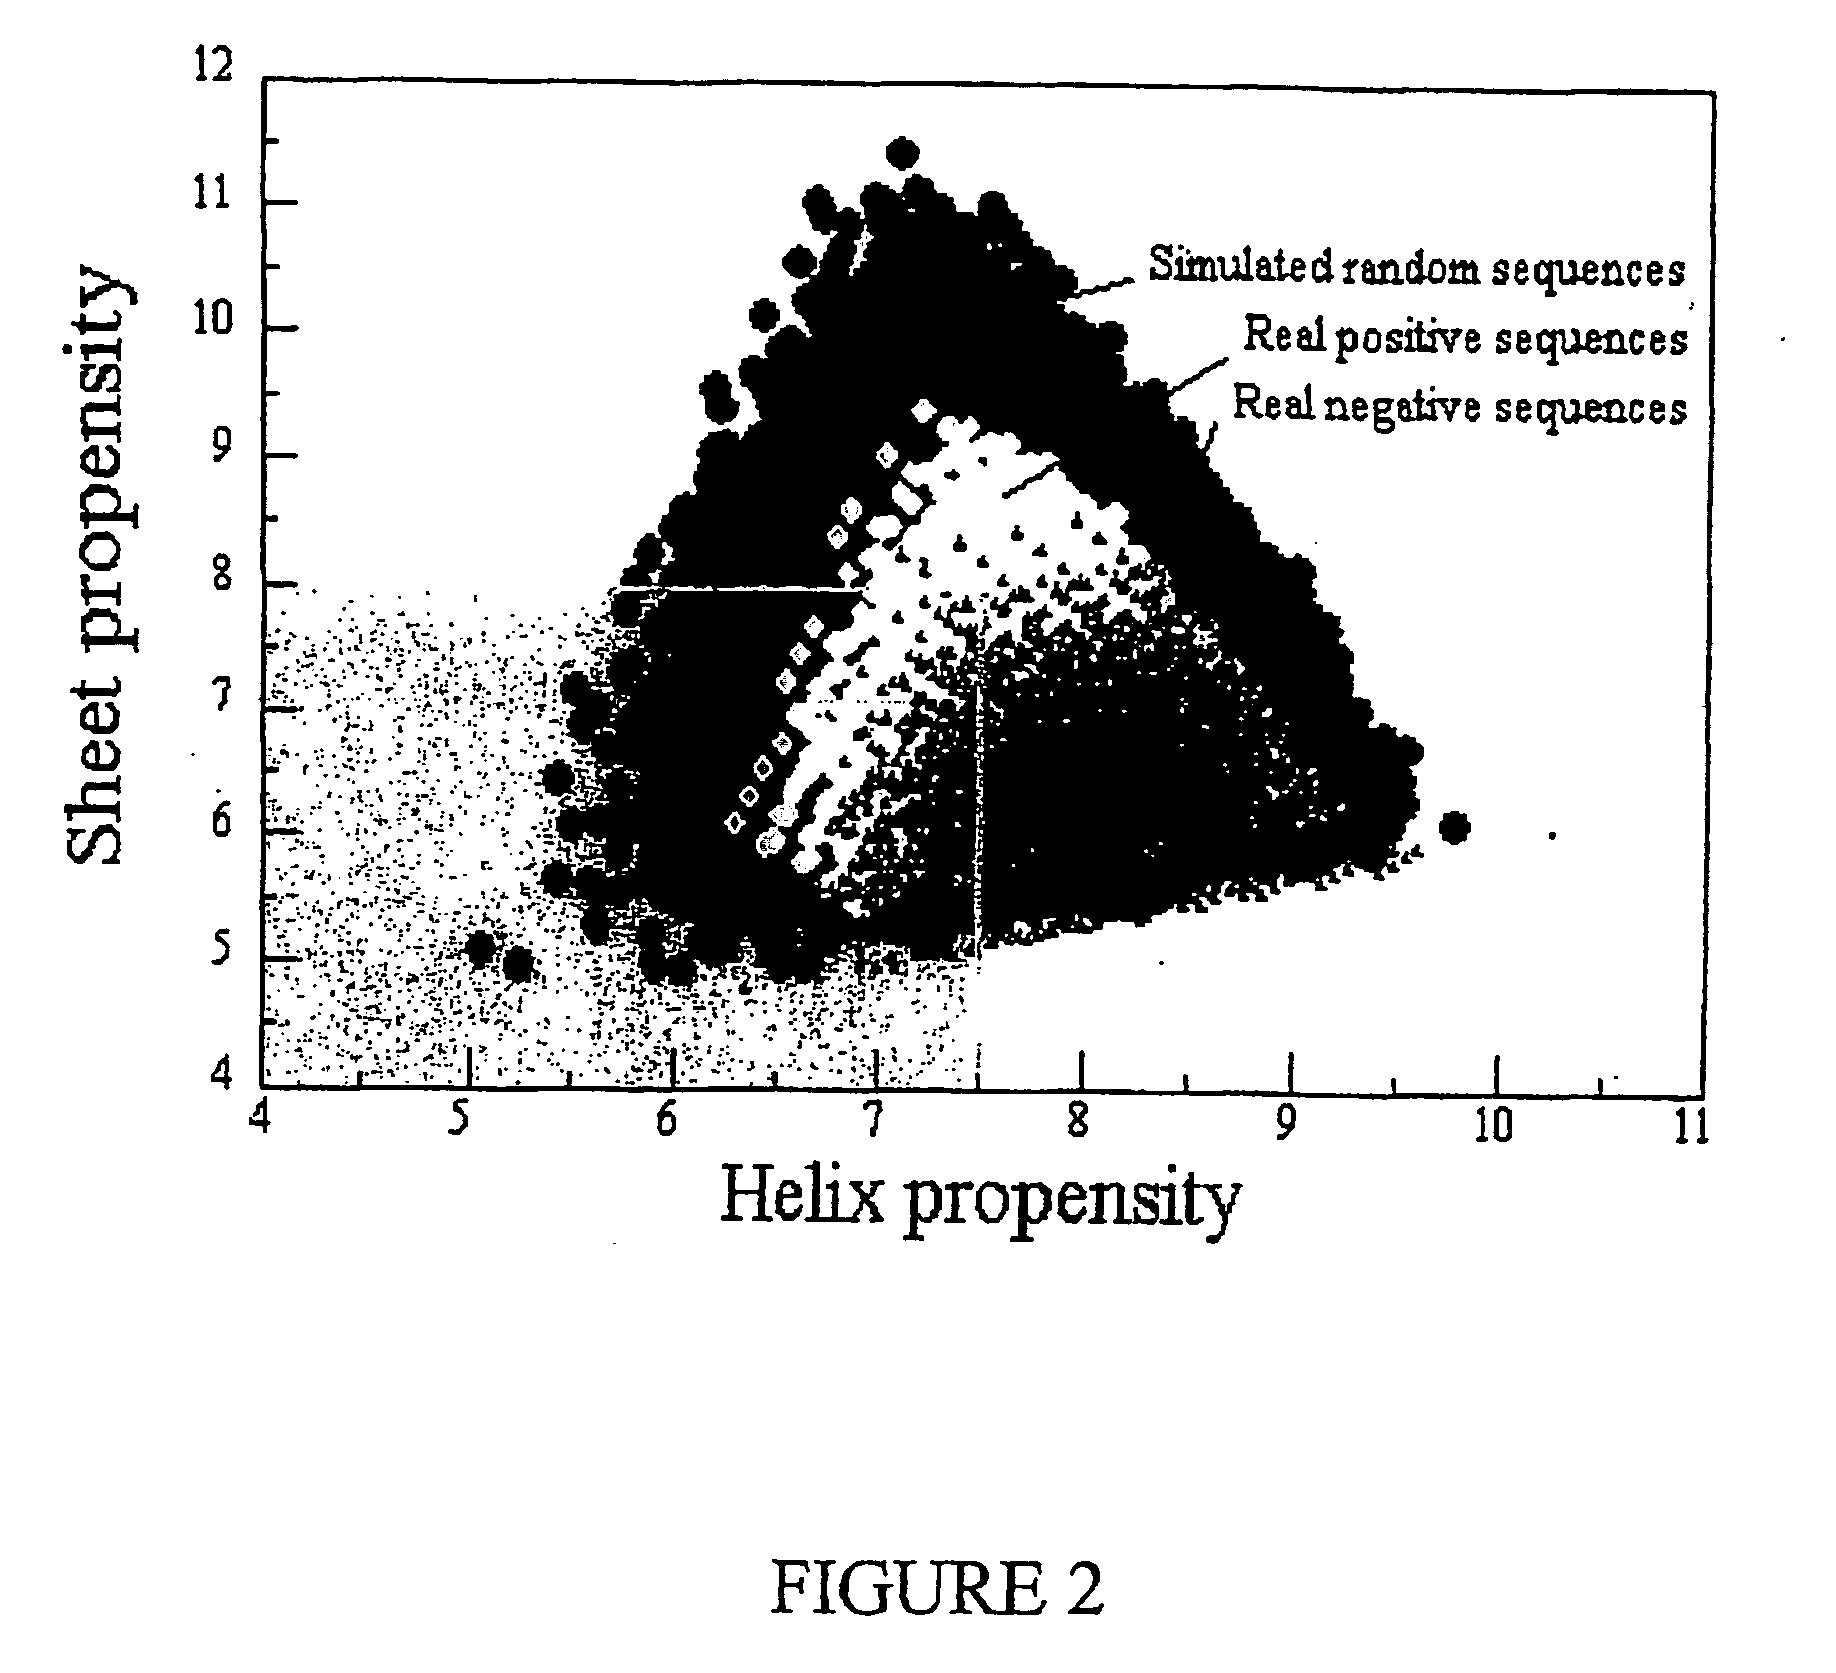 Multilayer films, coatings, and microcapsules comprising polypeptides